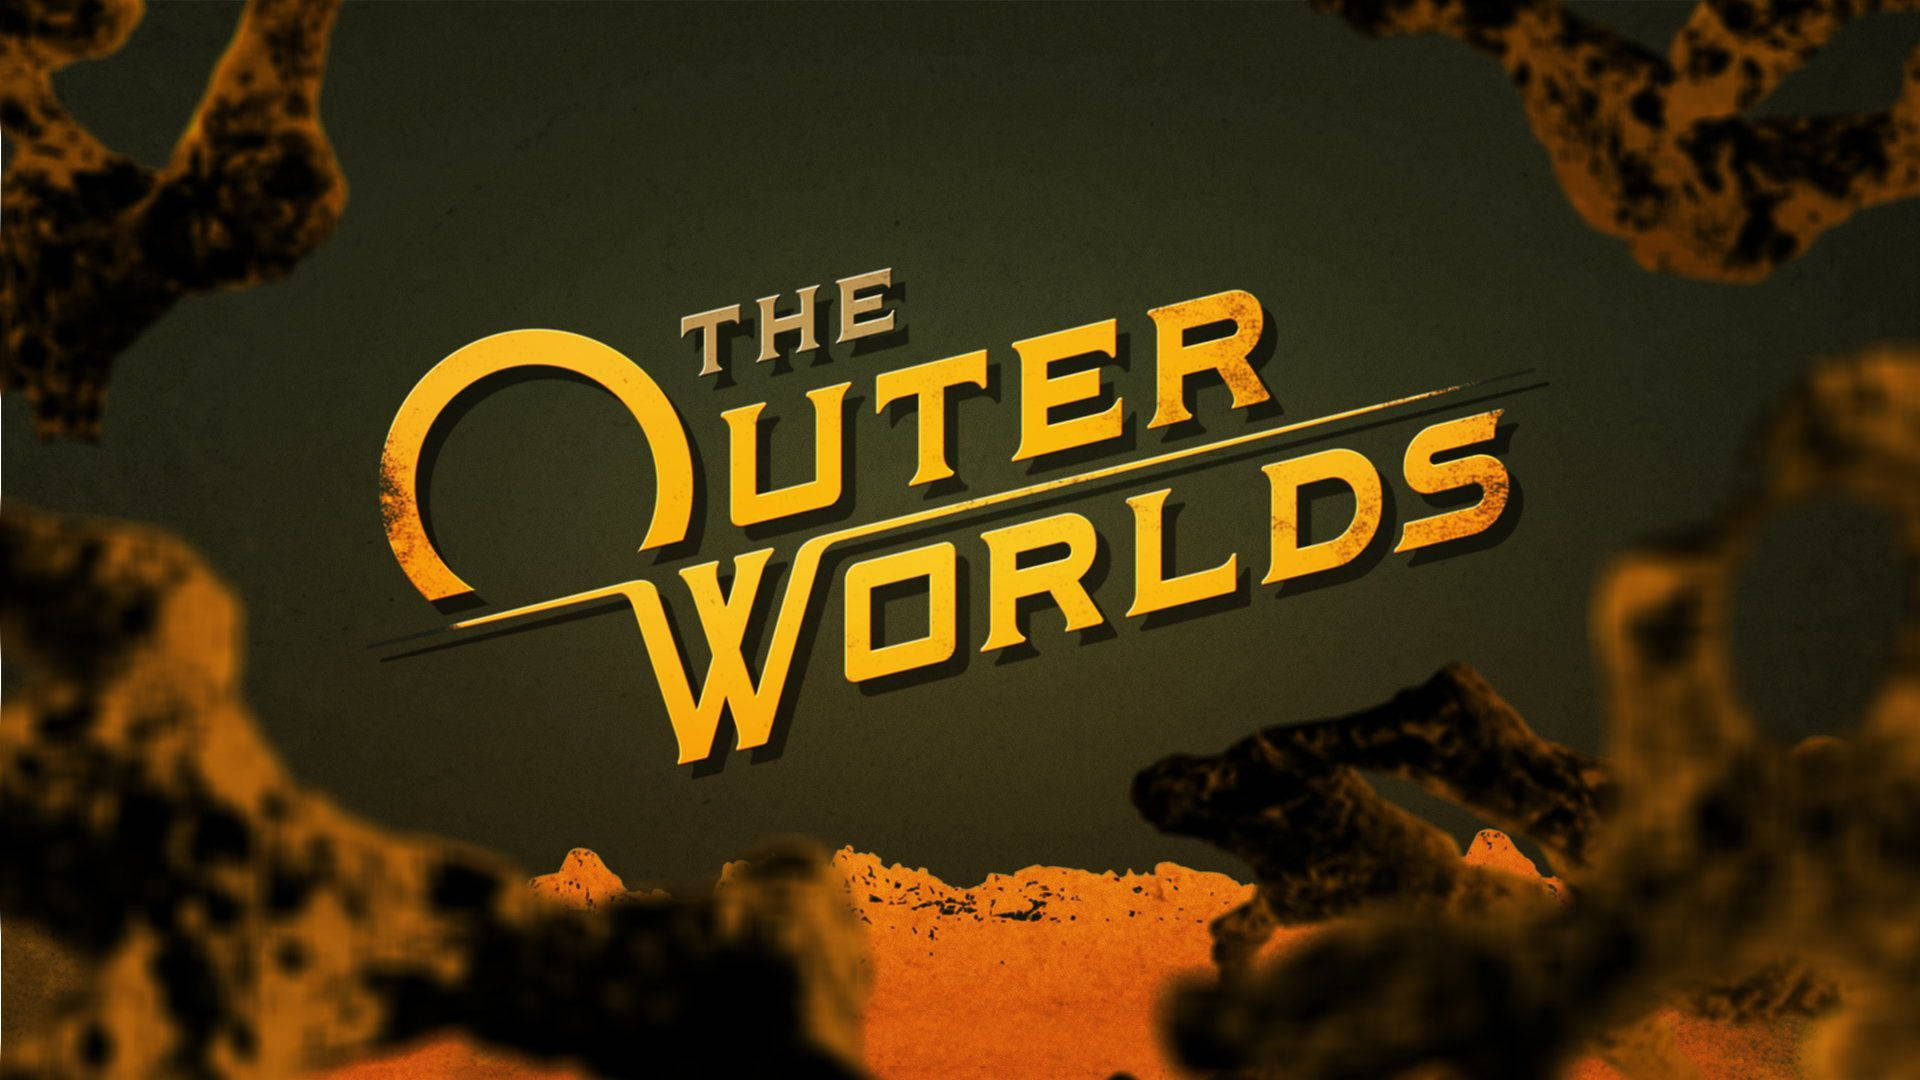 The Outer Worlds RPG Game Title Wallpaper